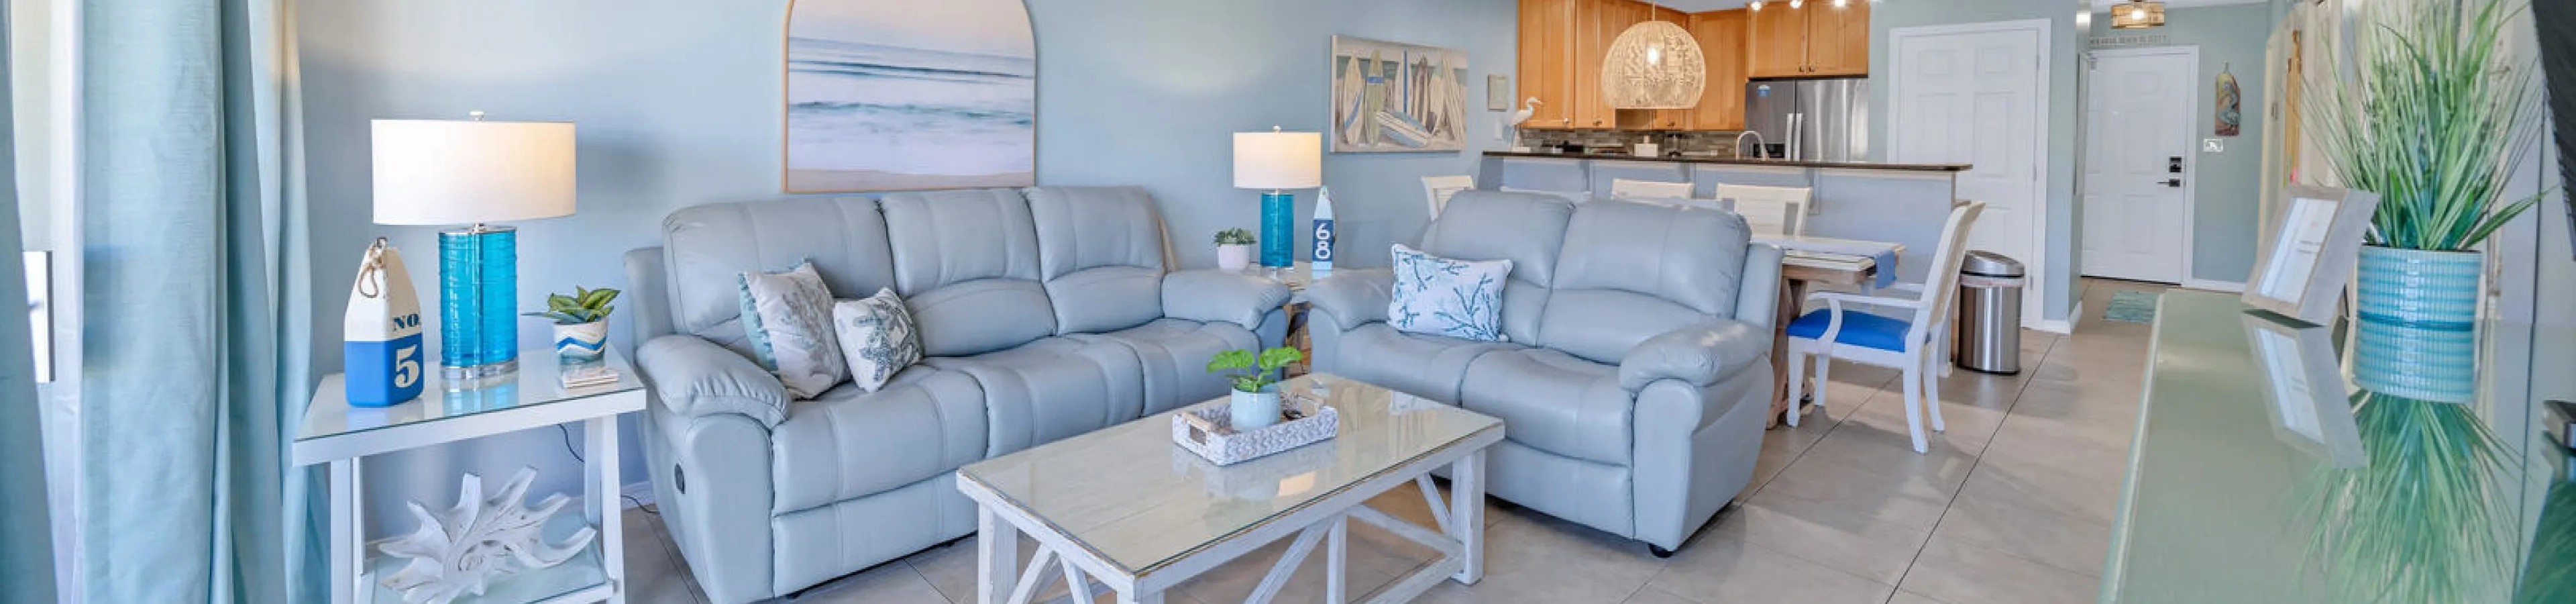 gray couch in a coastal room